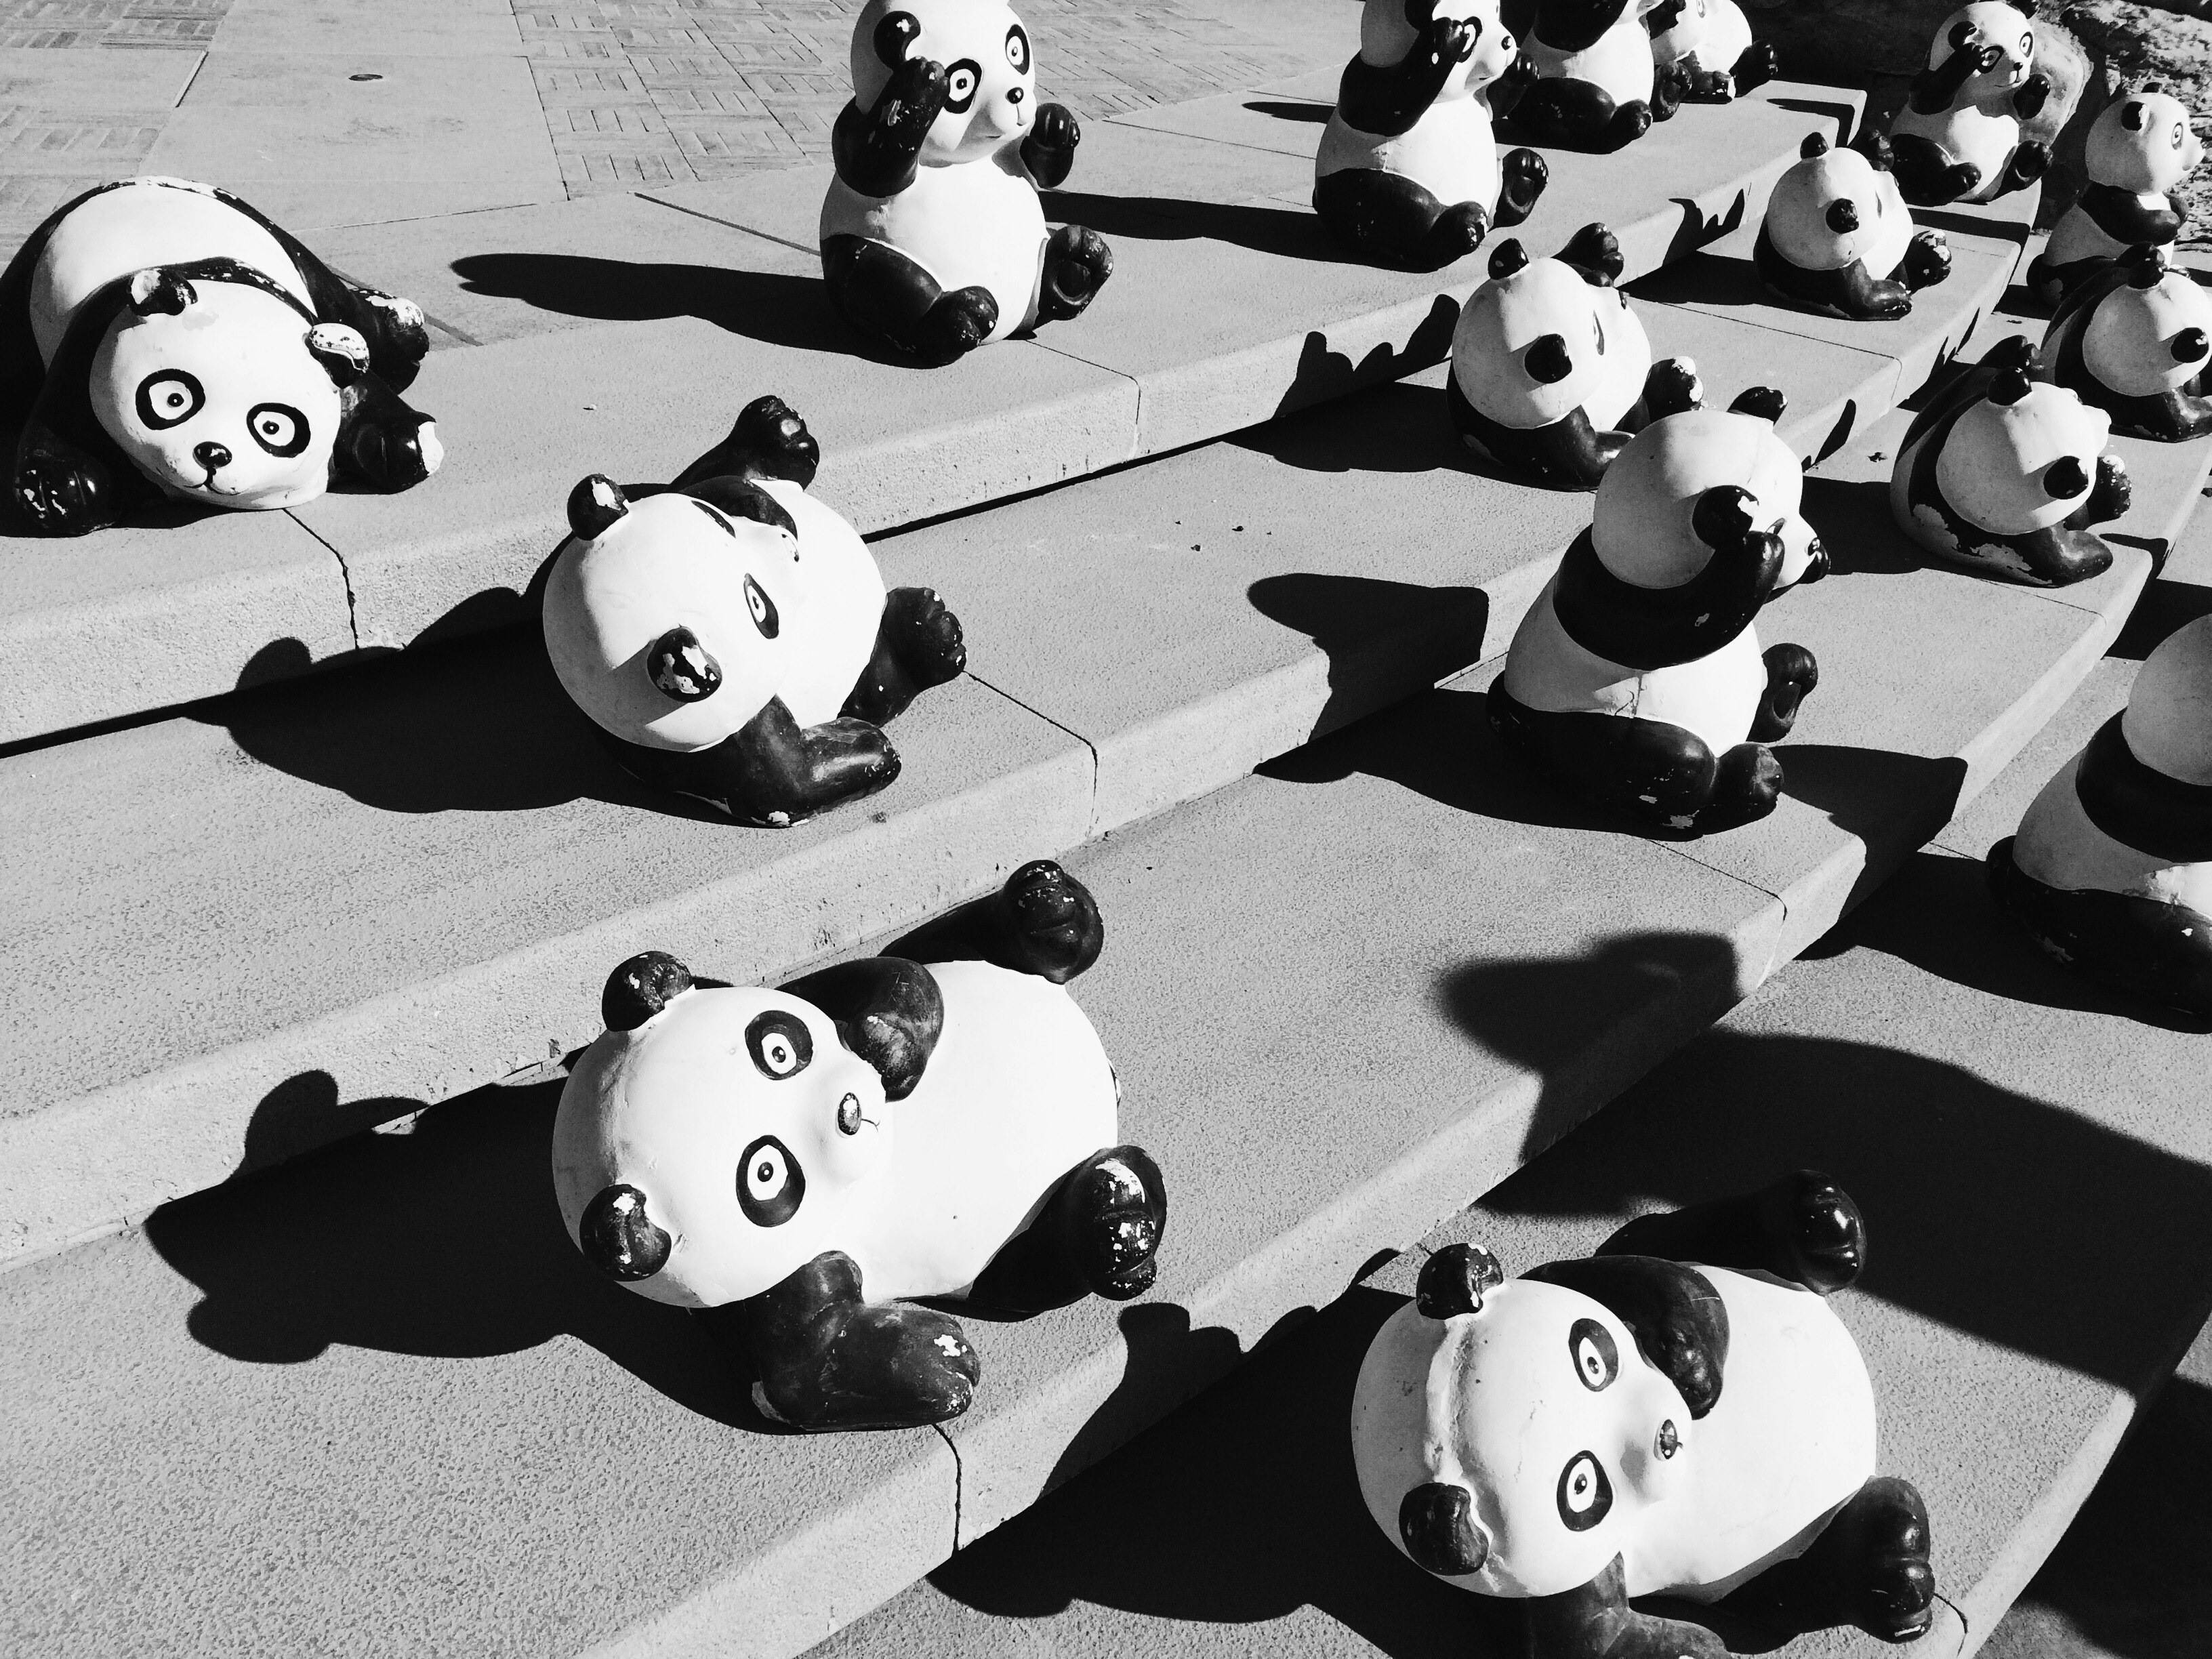 Panda statues on gray concrete stairs during daytime